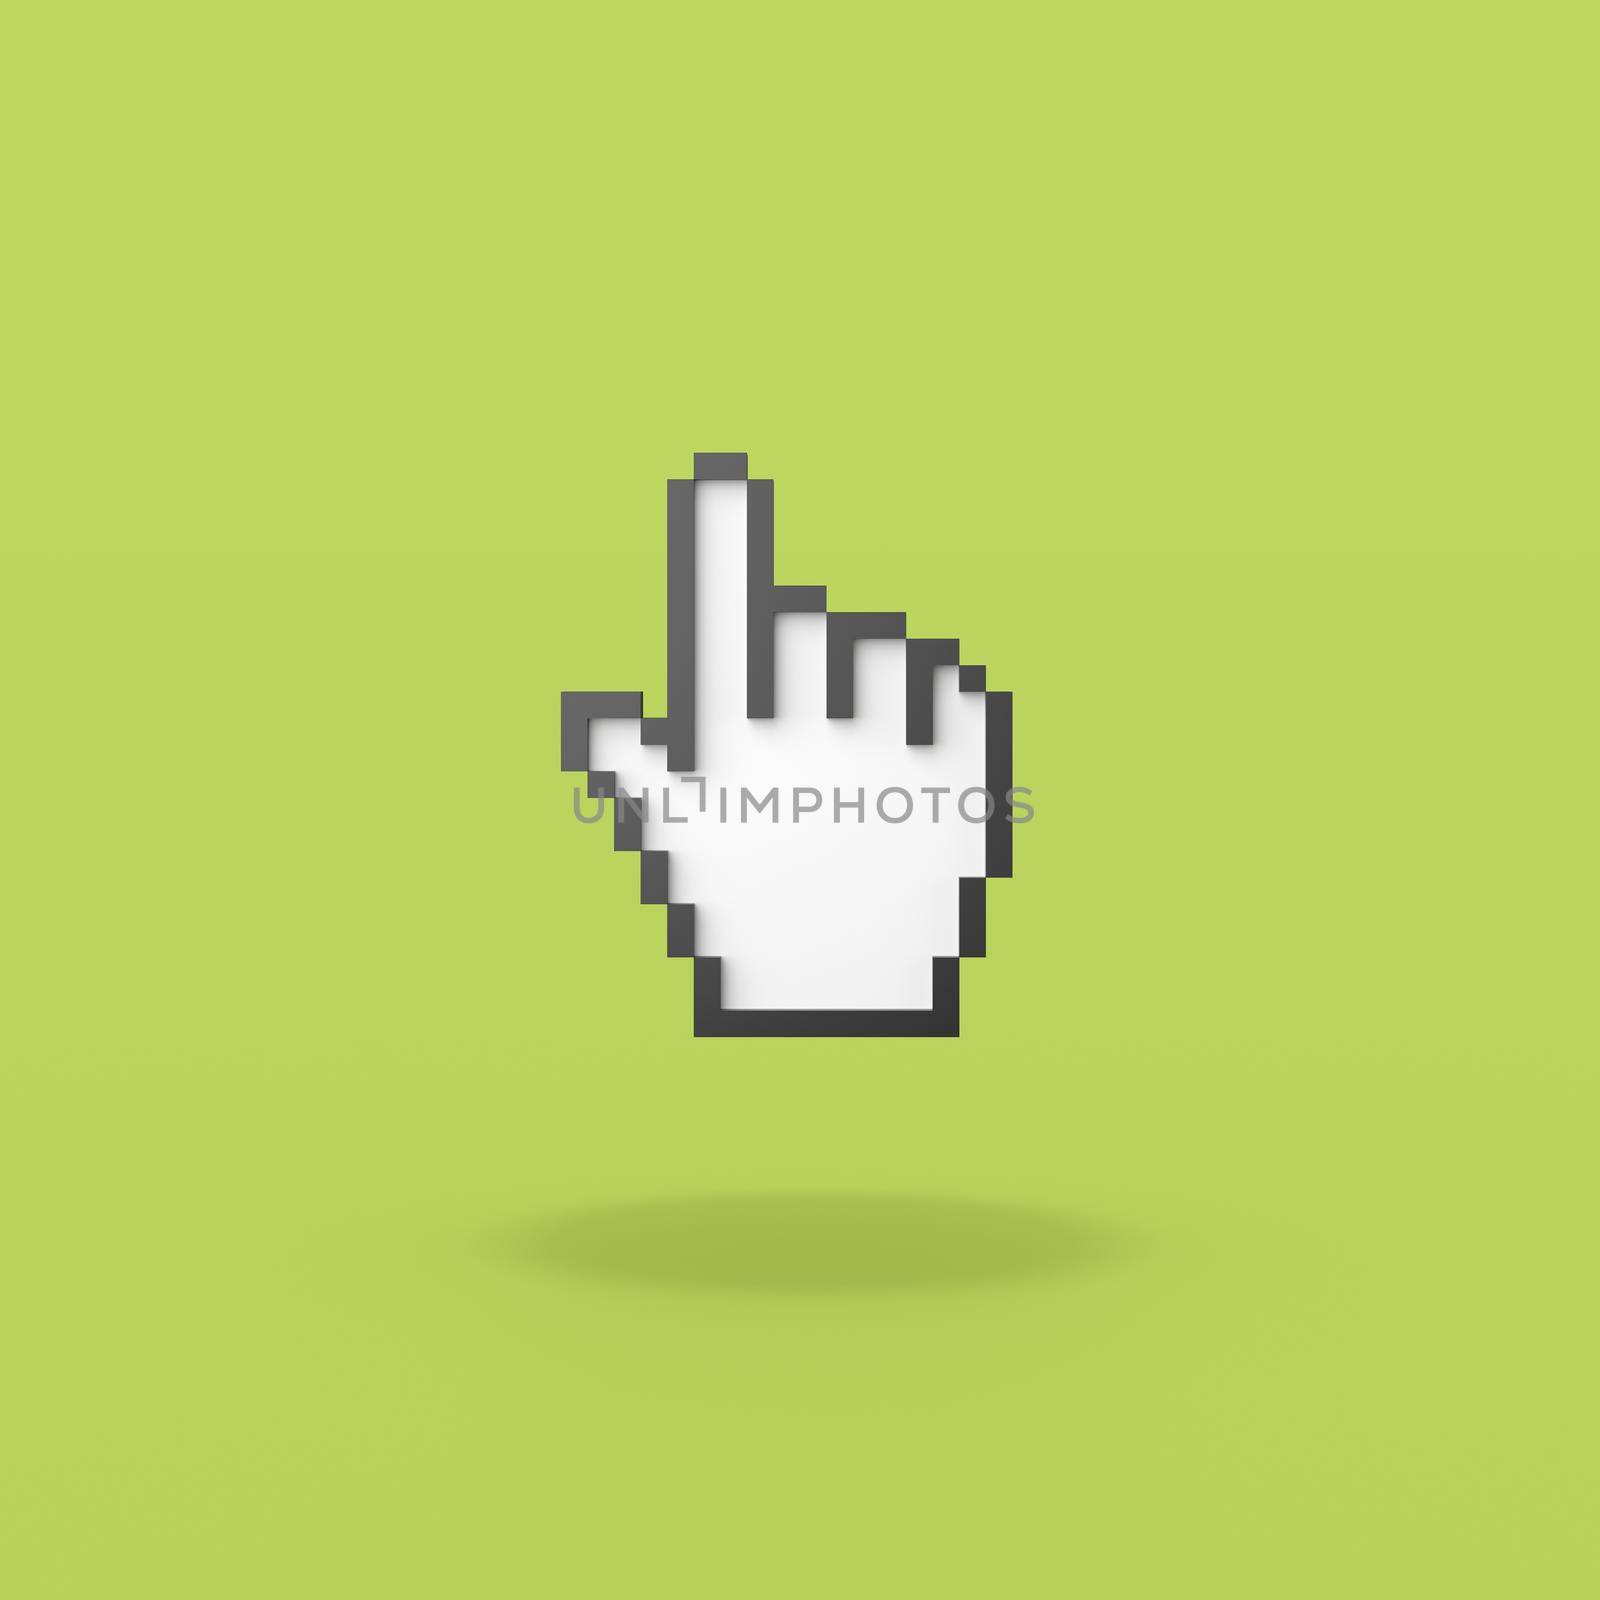 Hand Mouse Pointer Pixelated on Flat Green Background with Shadow 3D Illustration